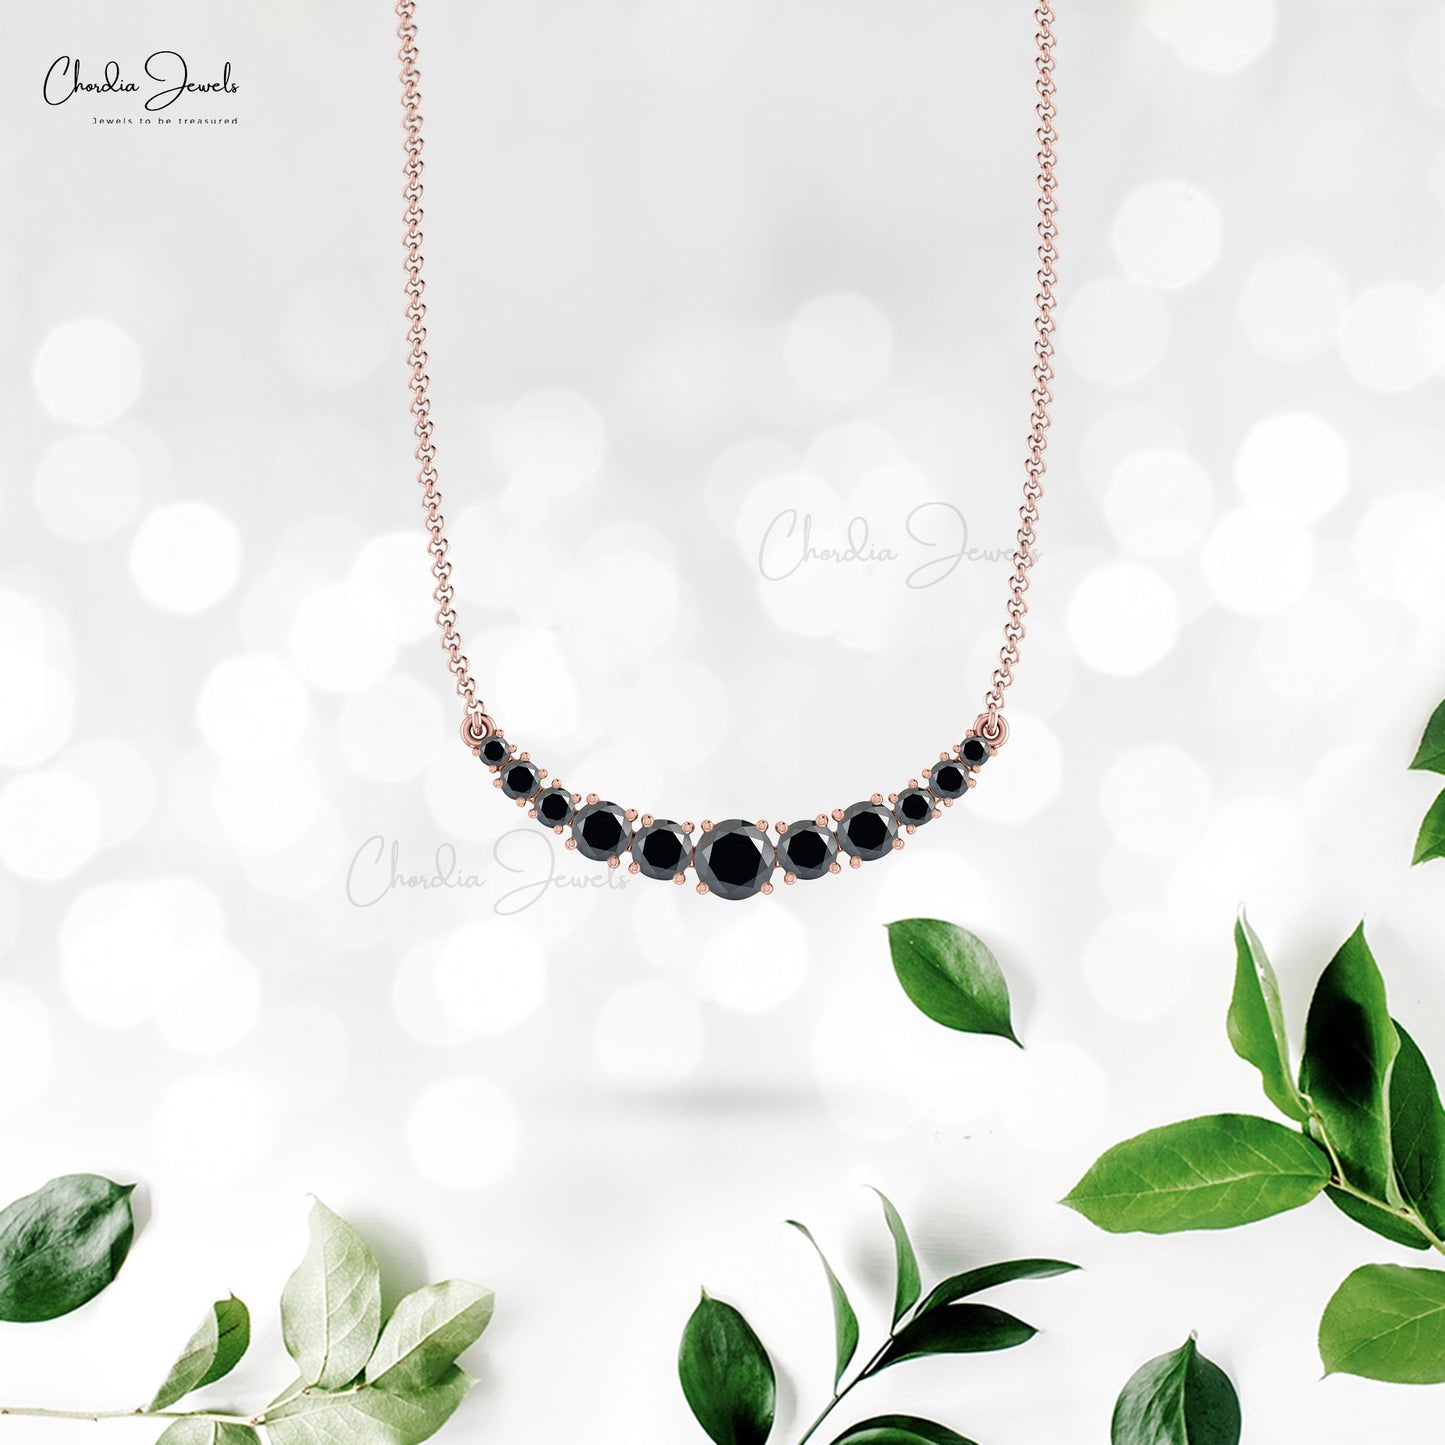 Natural Black Diamond Statement Necklace, 1.19 Carat Round Faceted Gemstone Necklace, April Birthstone Wedding Necklace Gift for Her